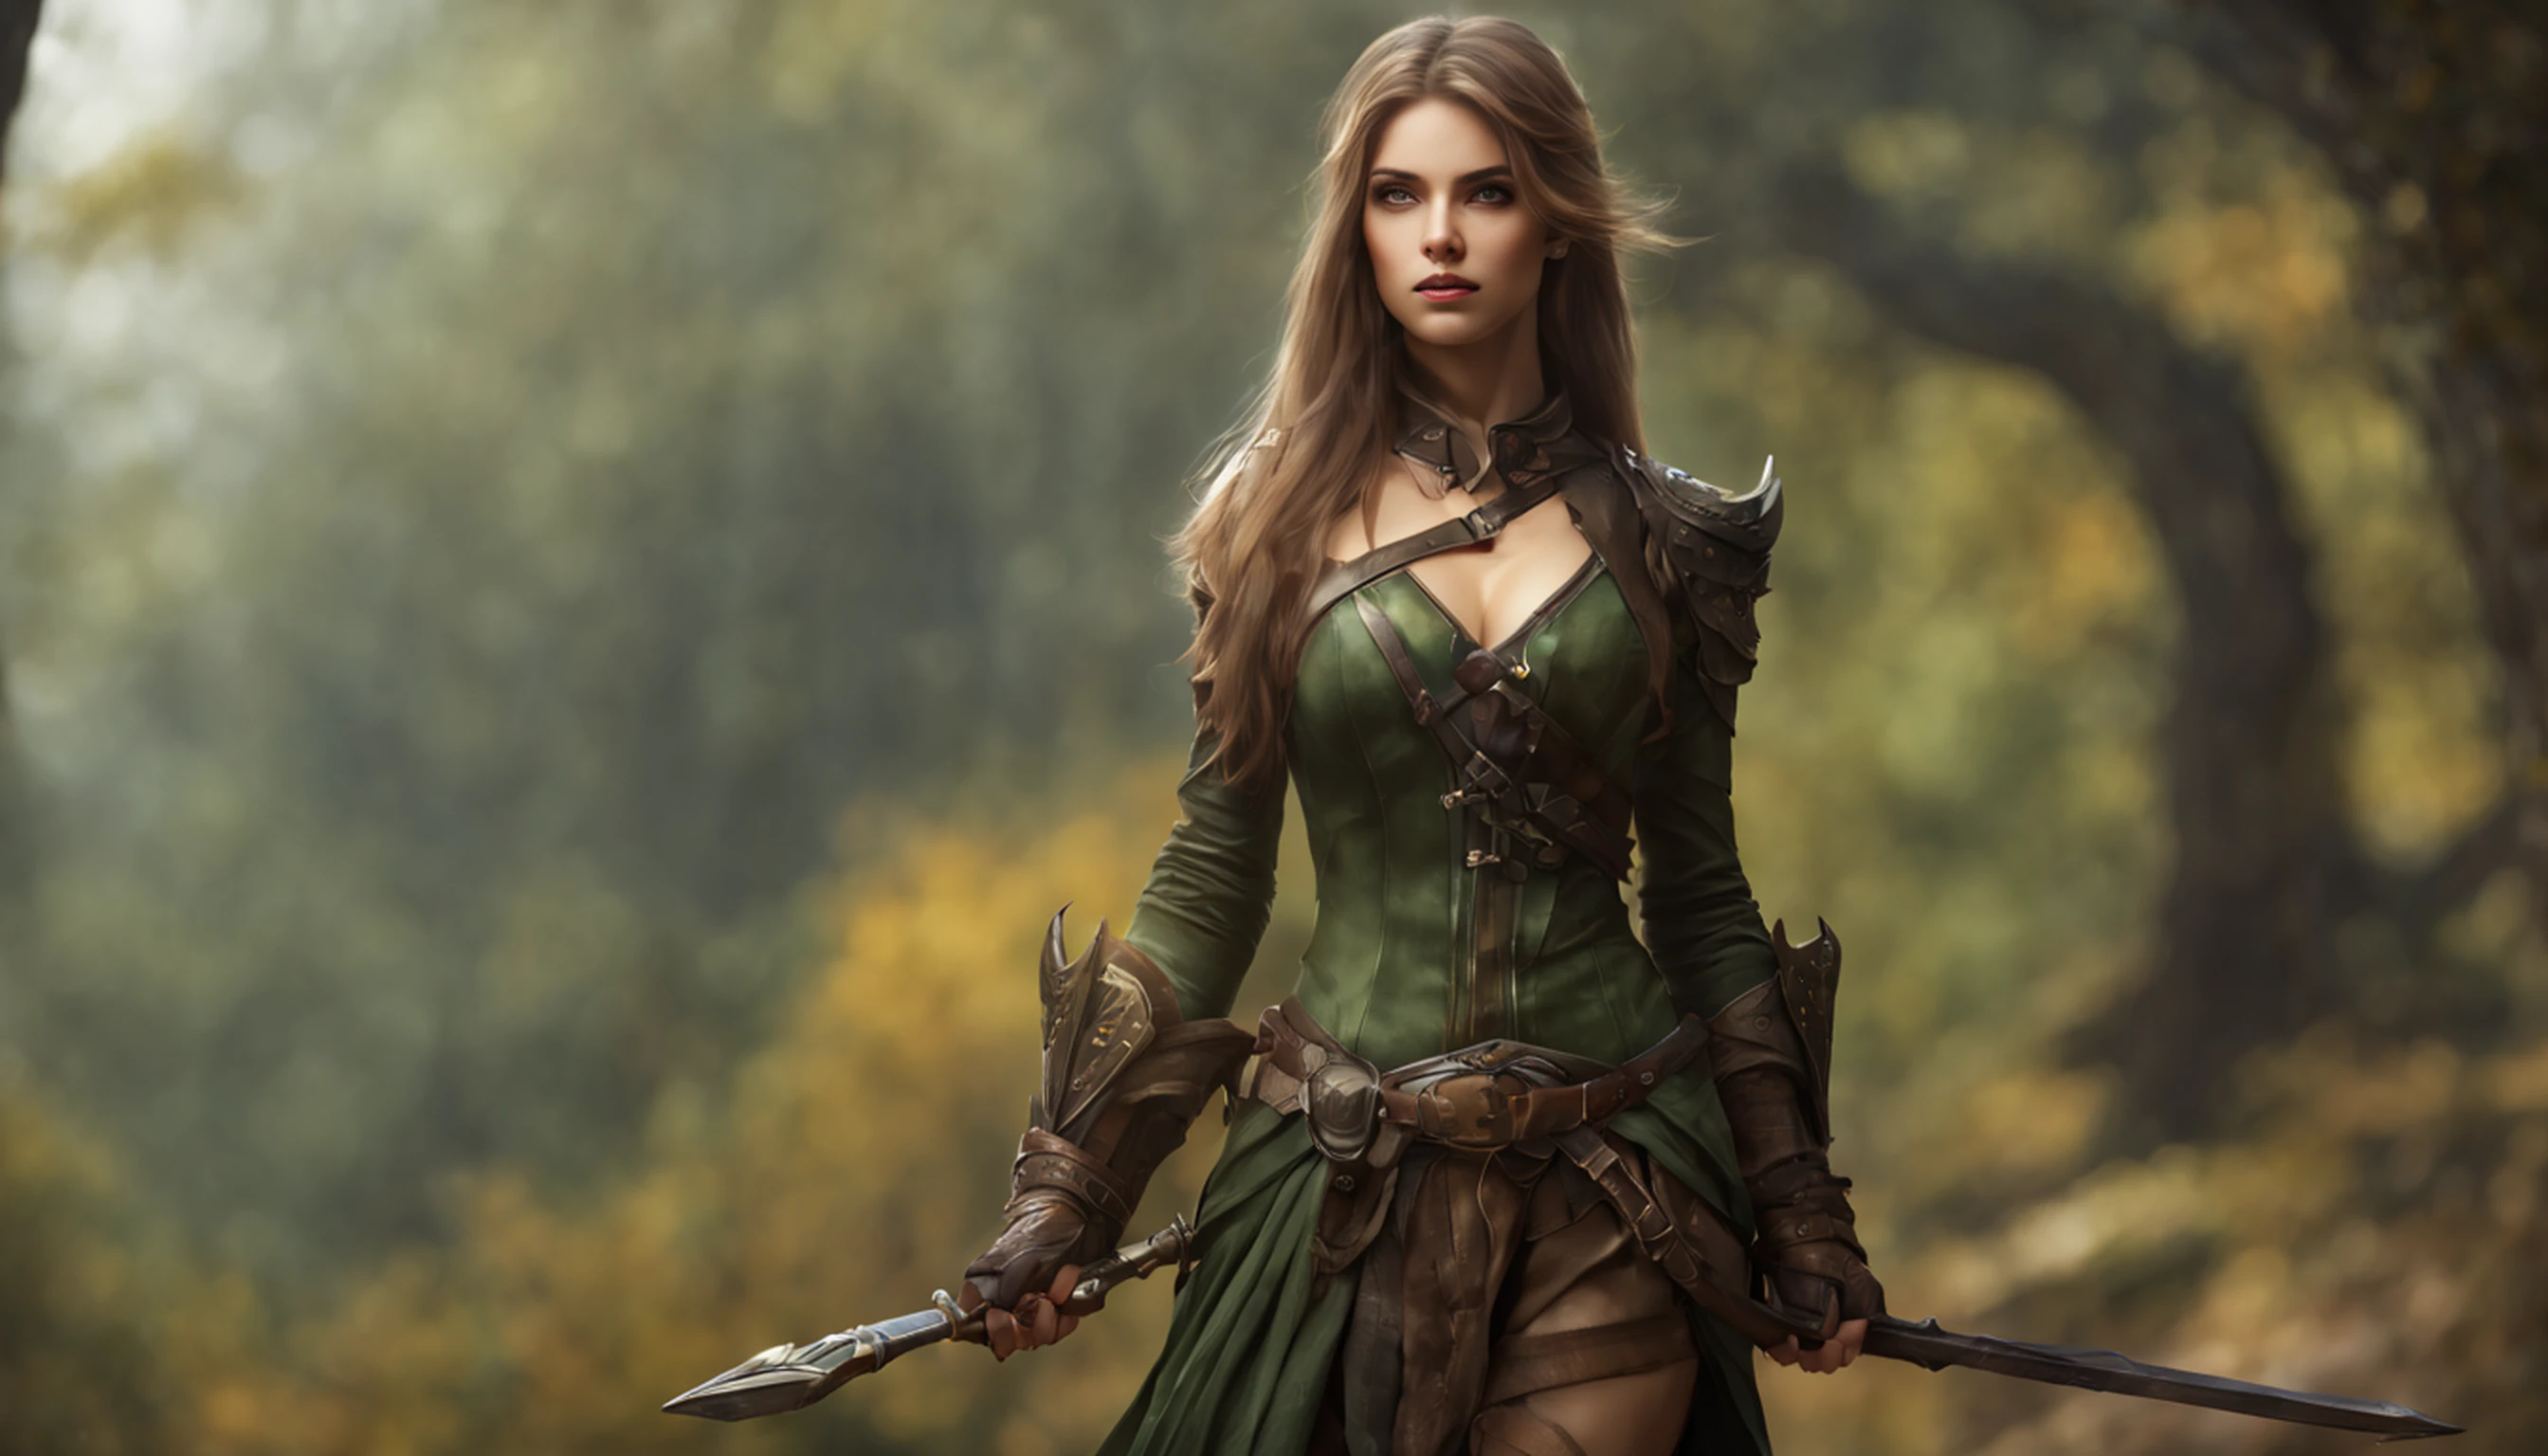 High details, best qualityer, 8K, [ultra detaild], master part, best qualityer, (extremely detaild), Dynamic angle, (ultra wide shot), .RAW, photorrealistic, Fantasyart, dnd art, Arte de RPG, realist art, A wide-angle image of a female fae Ranger and her pet wolf, nature warrior, nature fighter, fully body, [[anatomically correcte]]. dynamic position (1.5 intricate details, master part, best qualityer) Talking to a wolf (1.6 Intricate Details, master part, best qualityer), by a small rustic house (1.5 intricate details, master part, best qualityer), A woman wearing (Dark green mid-length dress) with leather boots, thigh and green hat (1.6 Intricate Details, master part, best qualityer), bushy hair, long  hair, auburn red hair, intense fair skin ((maroon)) Ojo, in small (Rustic house) and a stream that runs in the vicinity of the backgraound (1.6 Intricate Details, master part, best qualityer), Dawn light, nube (1.4 Intricate Details, master part, best qualityer), Dynamic angle, (1.4 Intricate Details, master part, best qualityer) 3D rendering, High details, best qualityer, highres, Ultra Wide Angle, Fantasy Celta, (shamrocks), poison ivy, fae, wearing green tophat, Leprechaun, faerie, Celta, celtic fantasy art, Fantasy Celta, faerie bonita, faerie bonita, Fantasyart muito bonita, Thu, beautiful autumn spirit, Temporada de Thu, (Dark colored roses), Perfect creation, Perfect artwork, highy detailed, detailed artwork, master part, Perfect creation, Perfect artwork, (outlined iris), ((Ojos perfeitos)),